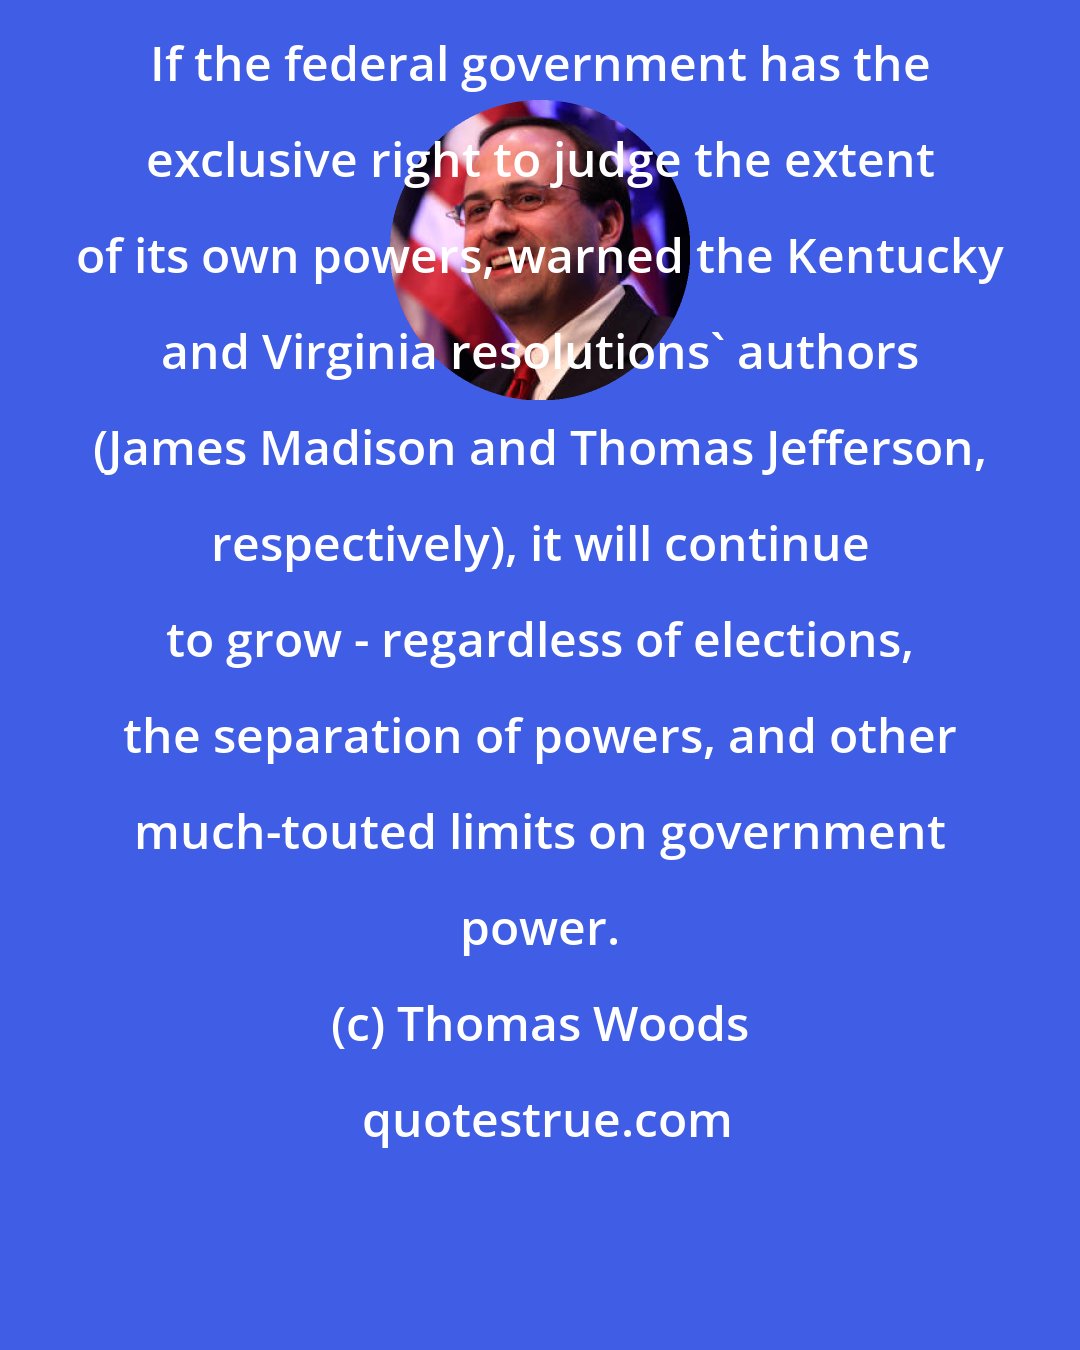 Thomas Woods: If the federal government has the exclusive right to judge the extent of its own powers, warned the Kentucky and Virginia resolutions' authors (James Madison and Thomas Jefferson, respectively), it will continue to grow - regardless of elections, the separation of powers, and other much-touted limits on government power.